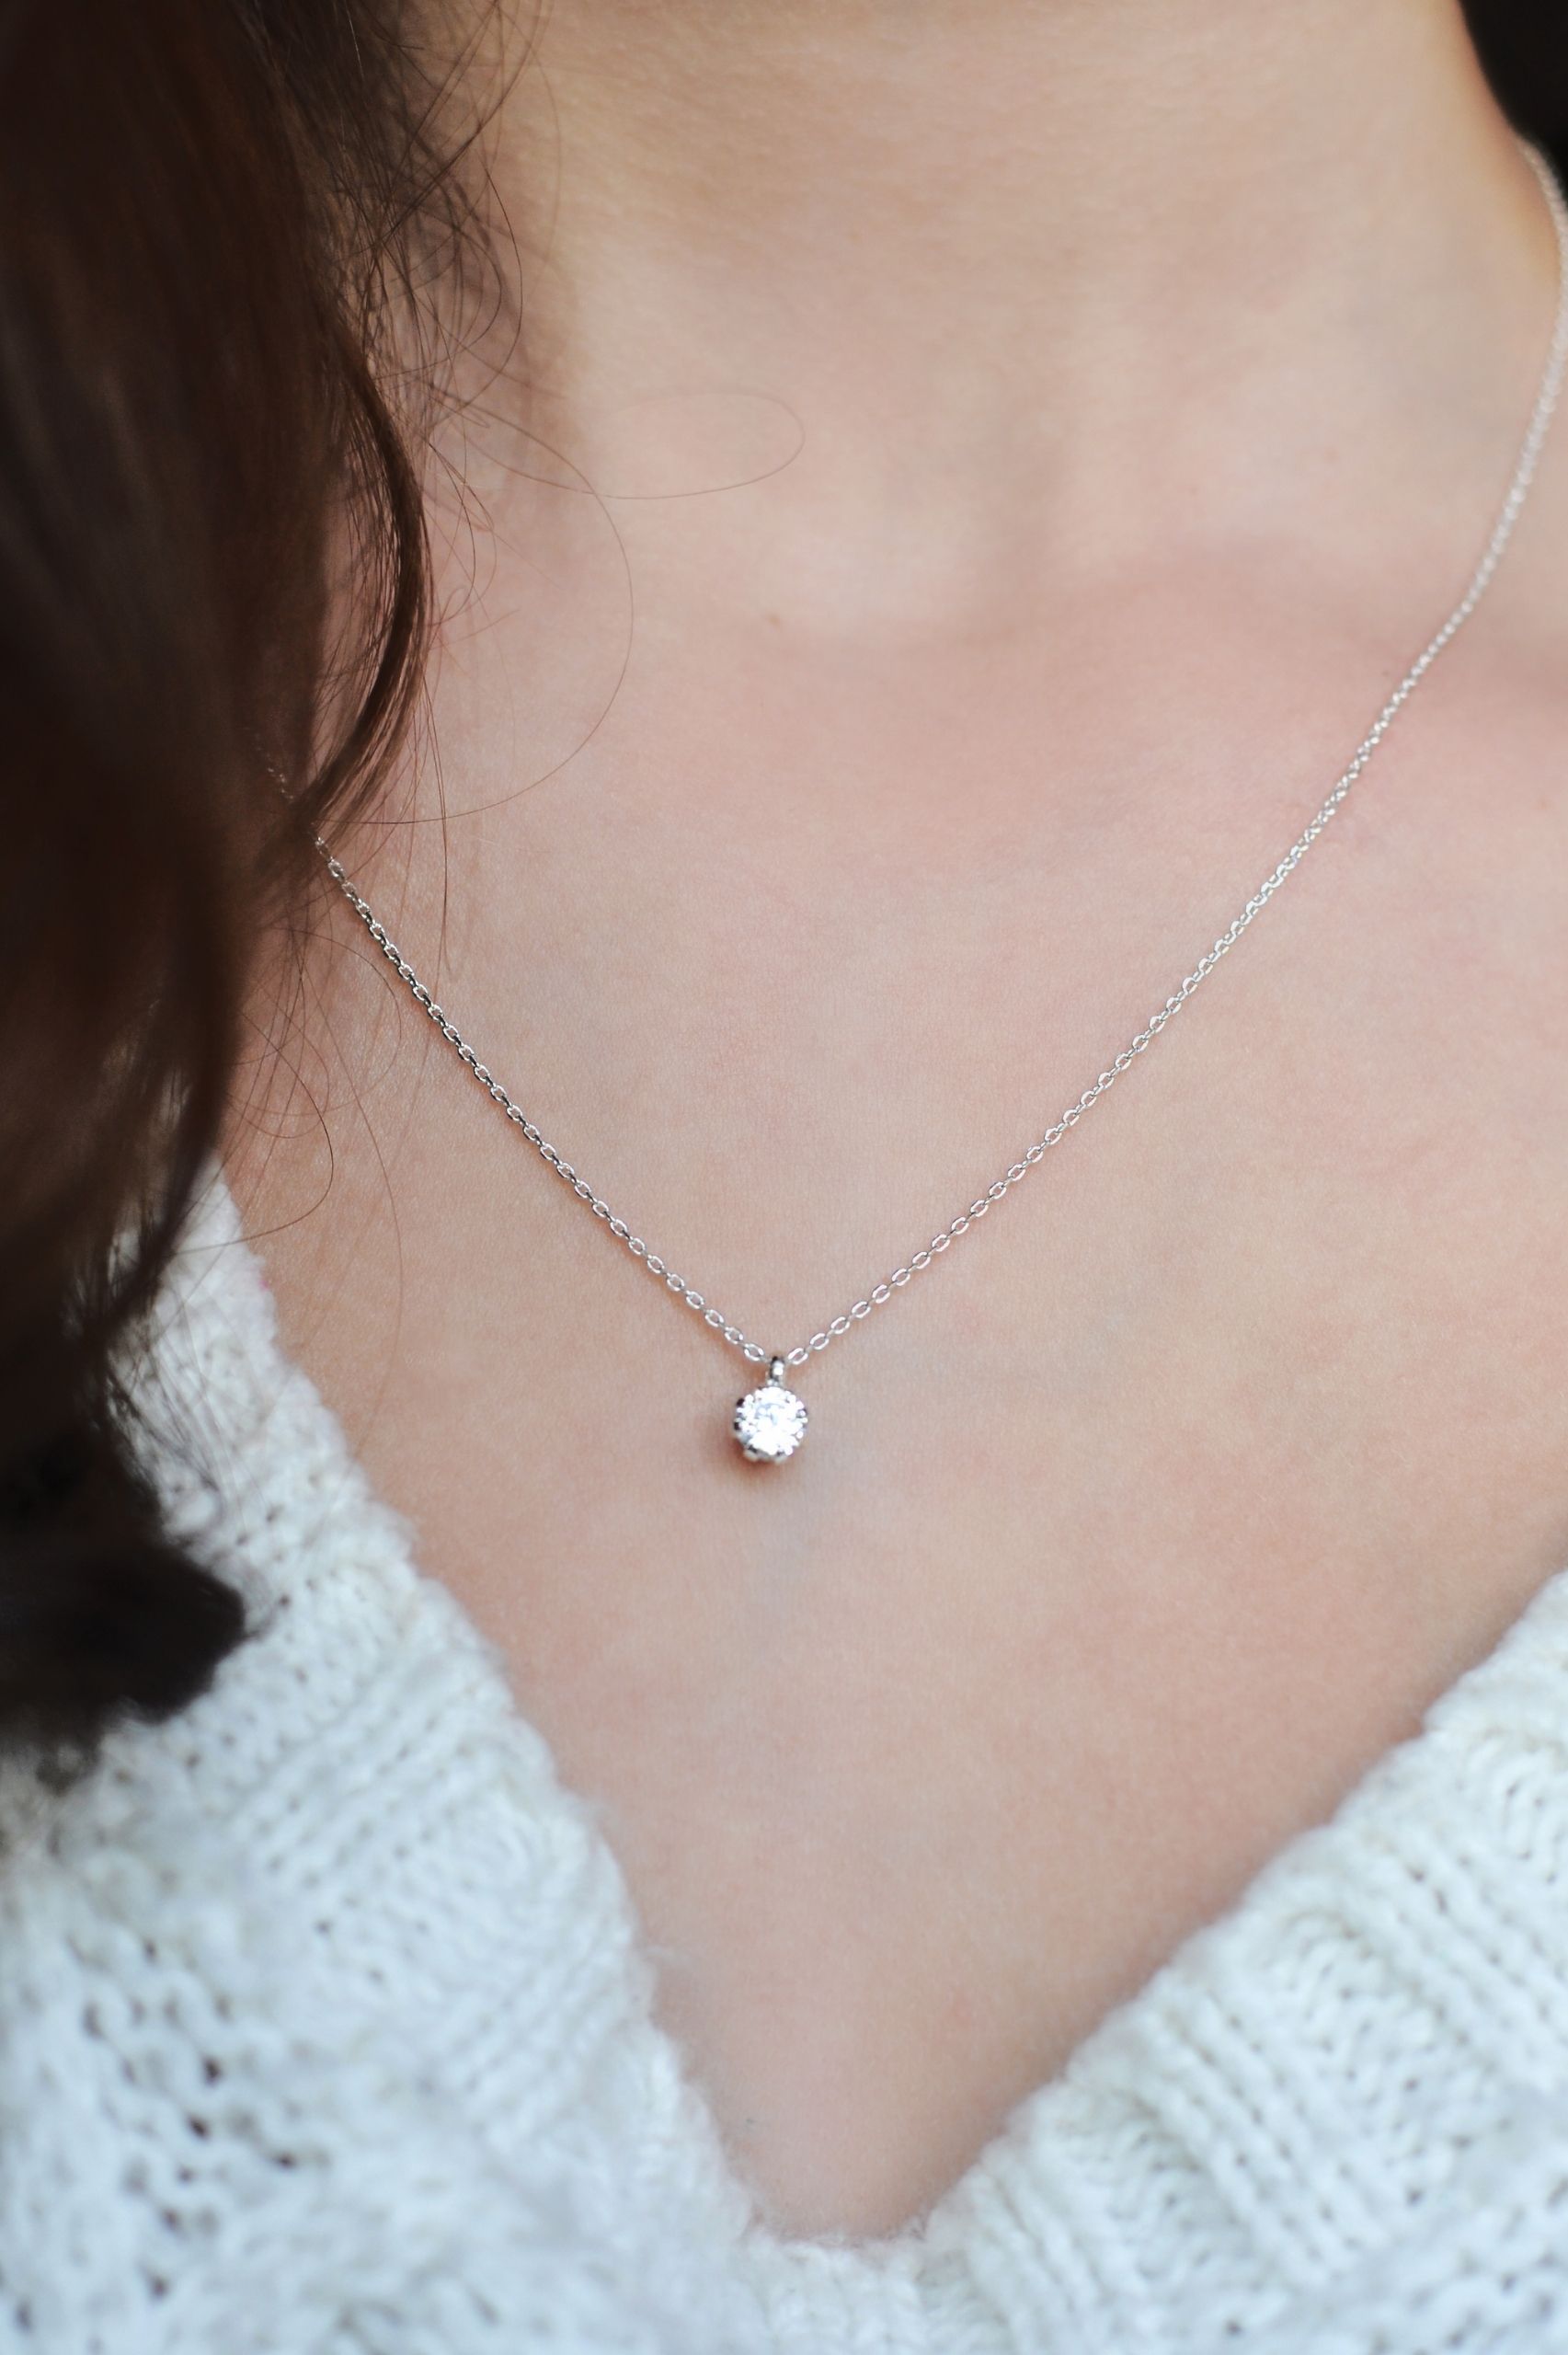 Express Your Love by Gifting a Necklace - Rita Reviews